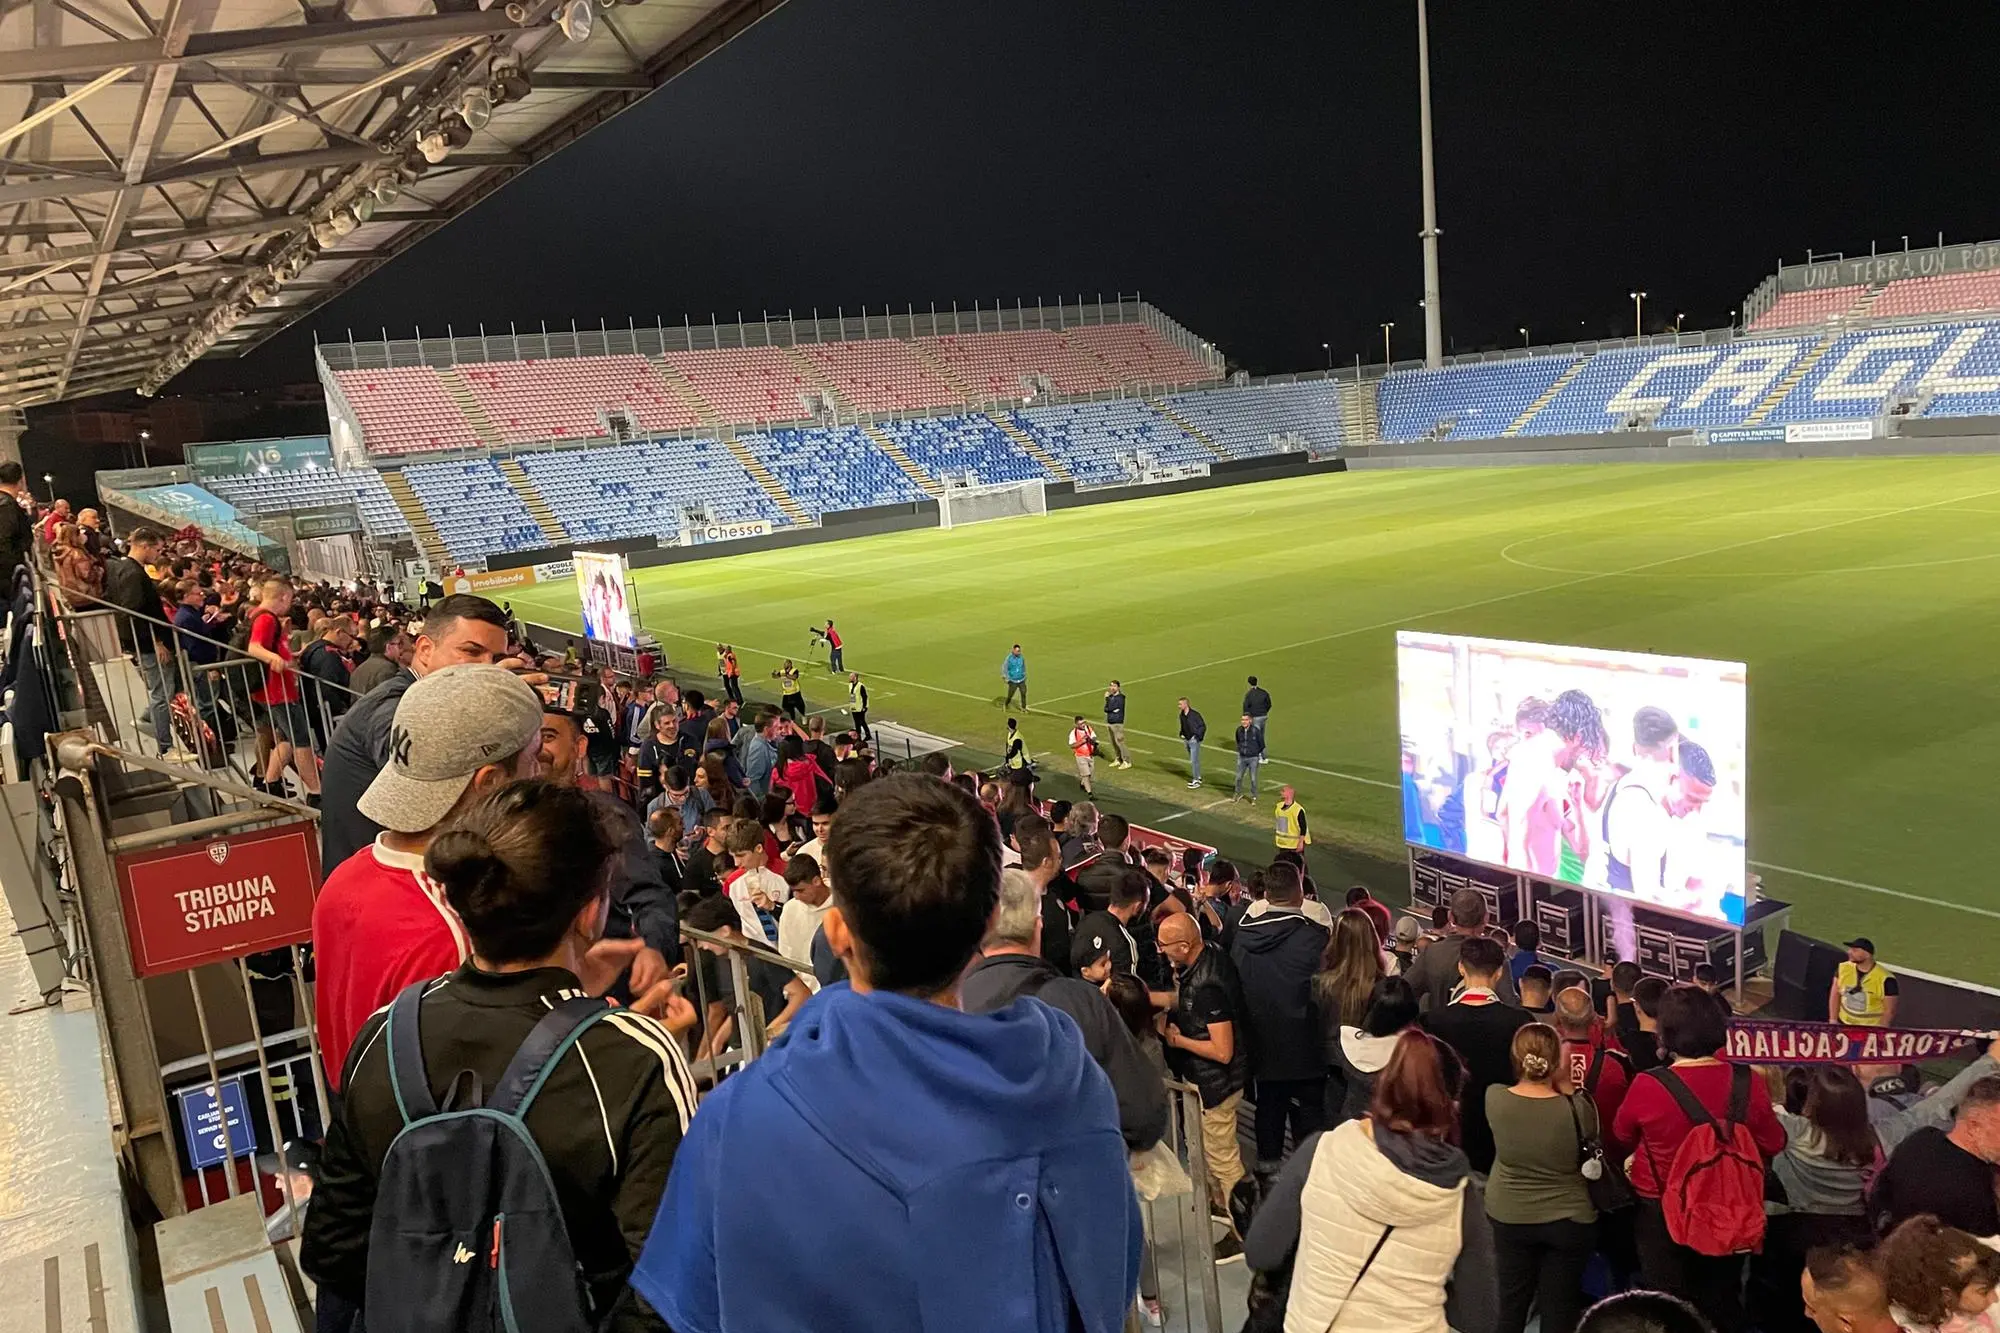 The big screens at the Domus in the match against Parma (rsp)